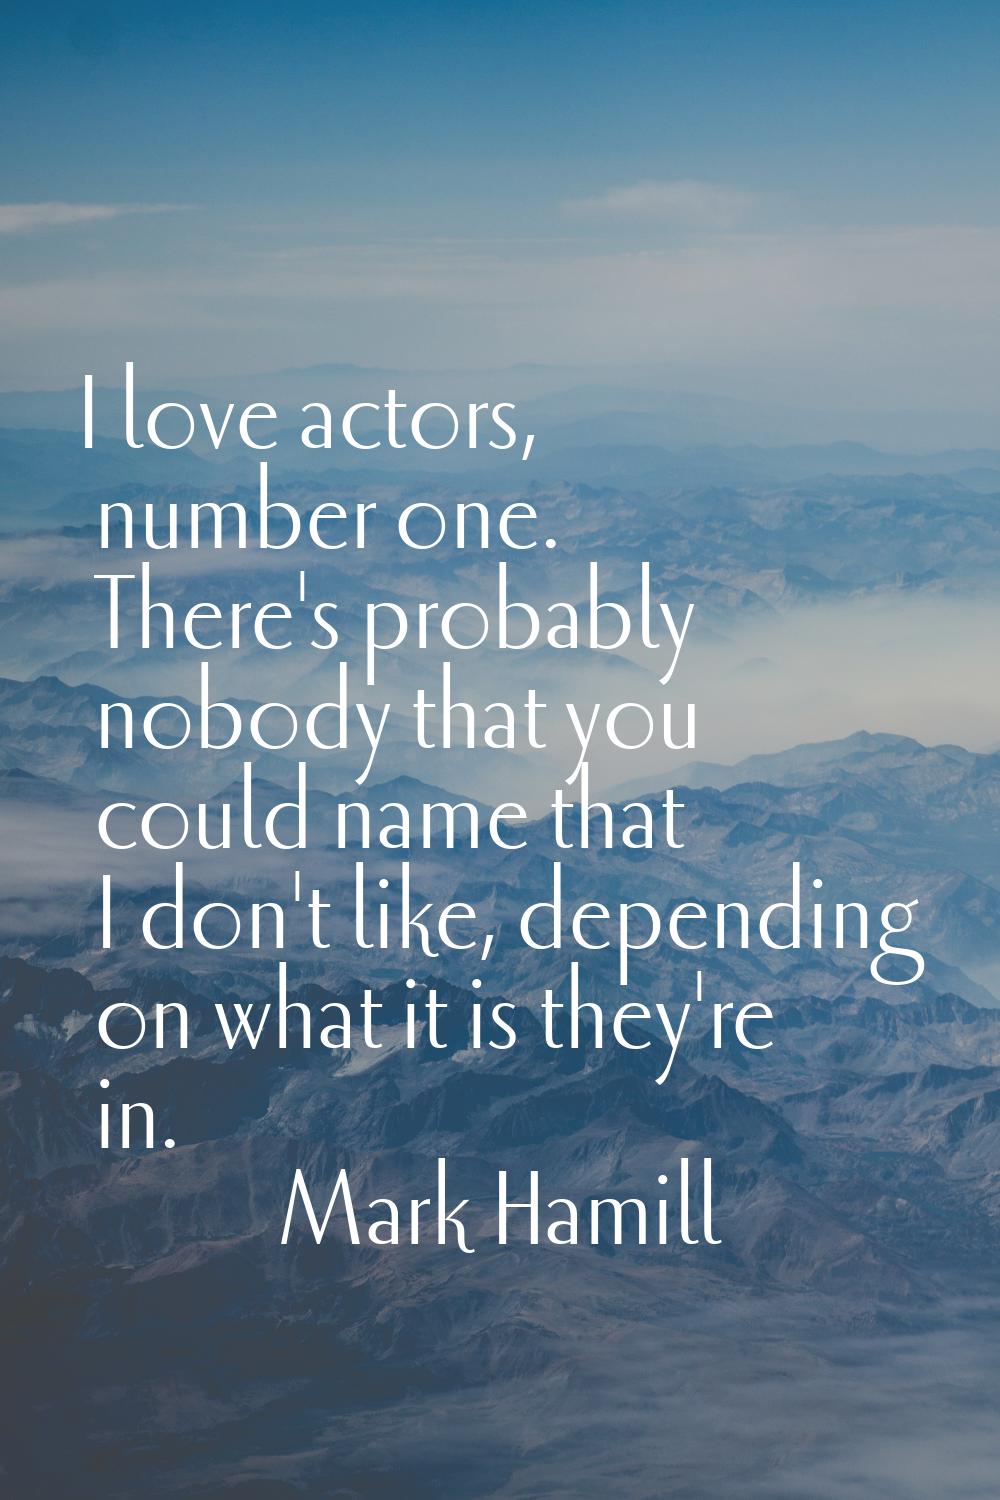 I love actors, number one. There's probably nobody that you could name that I don't like, depending